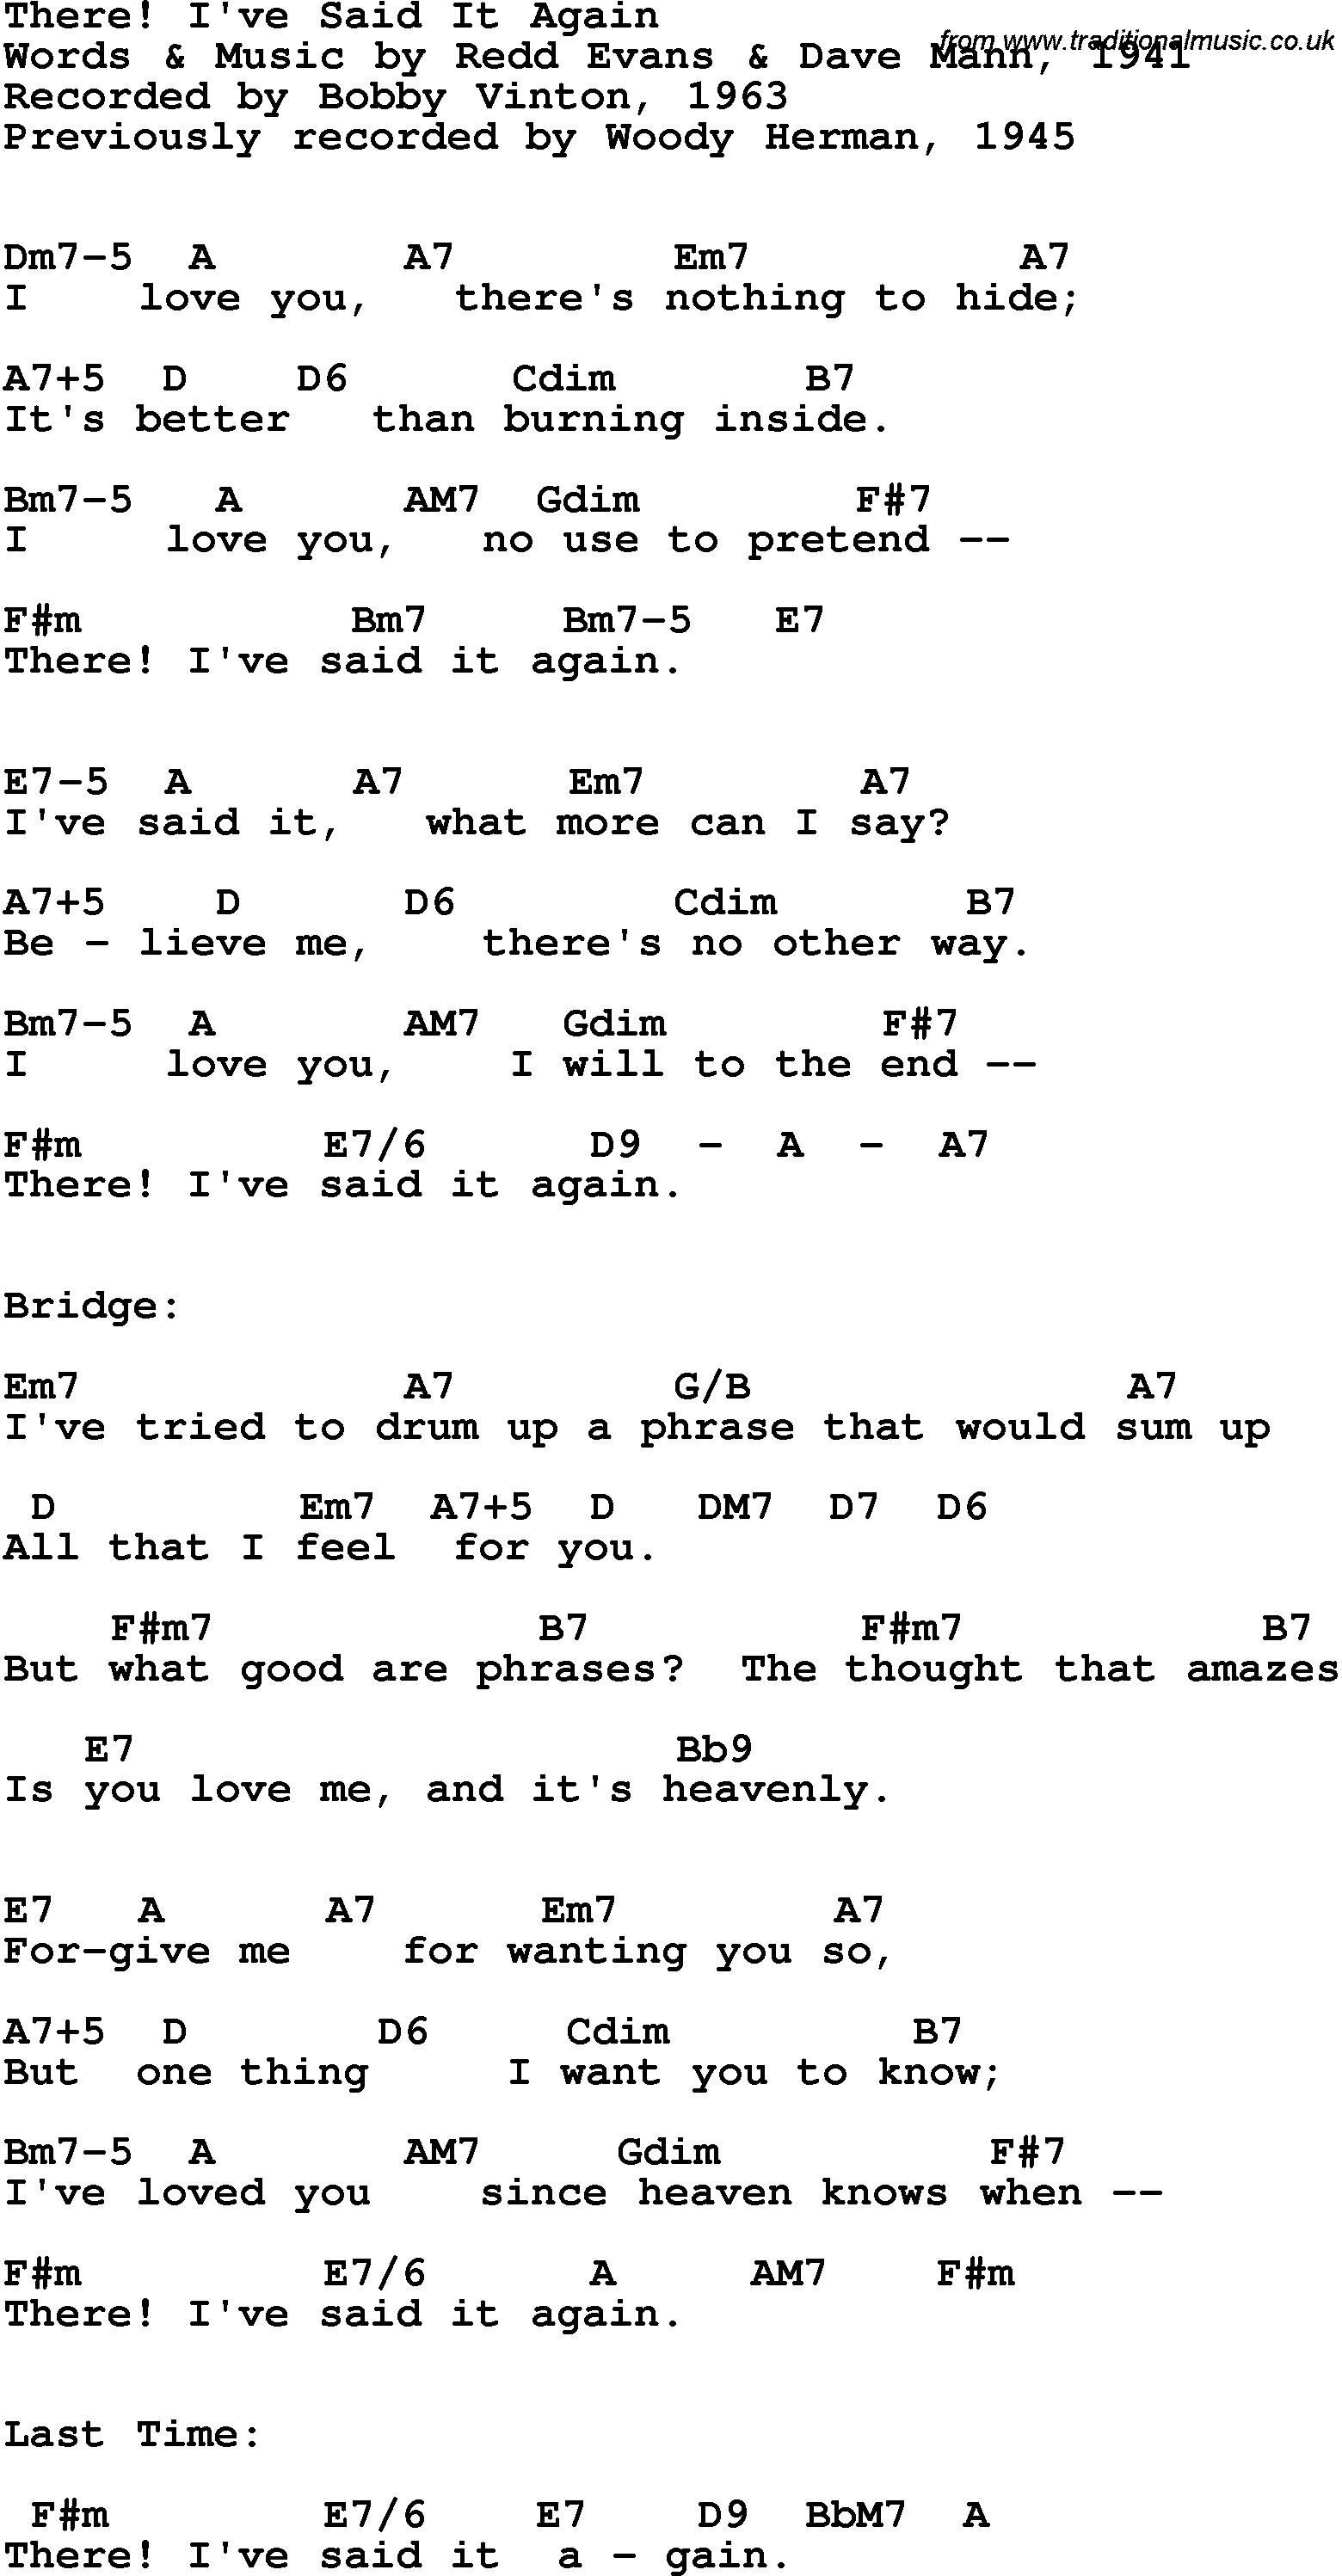 Song Lyrics with guitar chords for There! I've Said It Again - Bobby Vinton, 1963